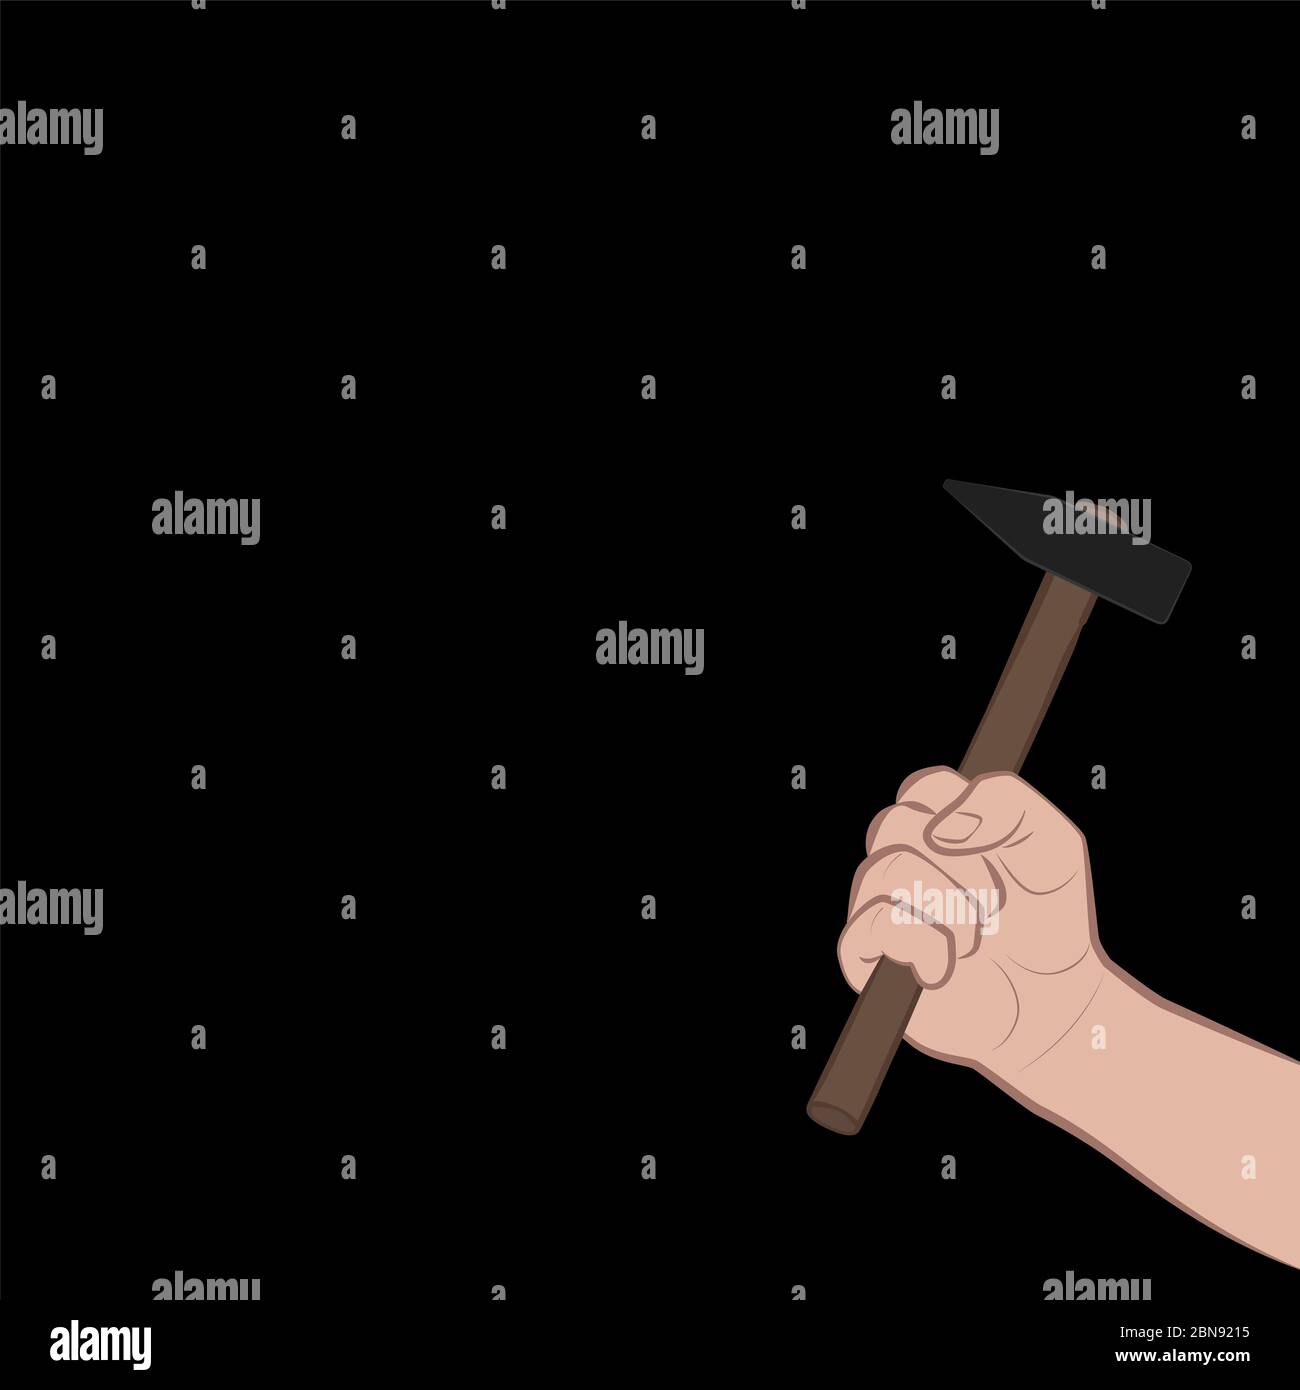 Hand with hammer at night, symbolic for housebreaking, threat, raid, robbery, danger. Comic illustration on black background. Stock Photo